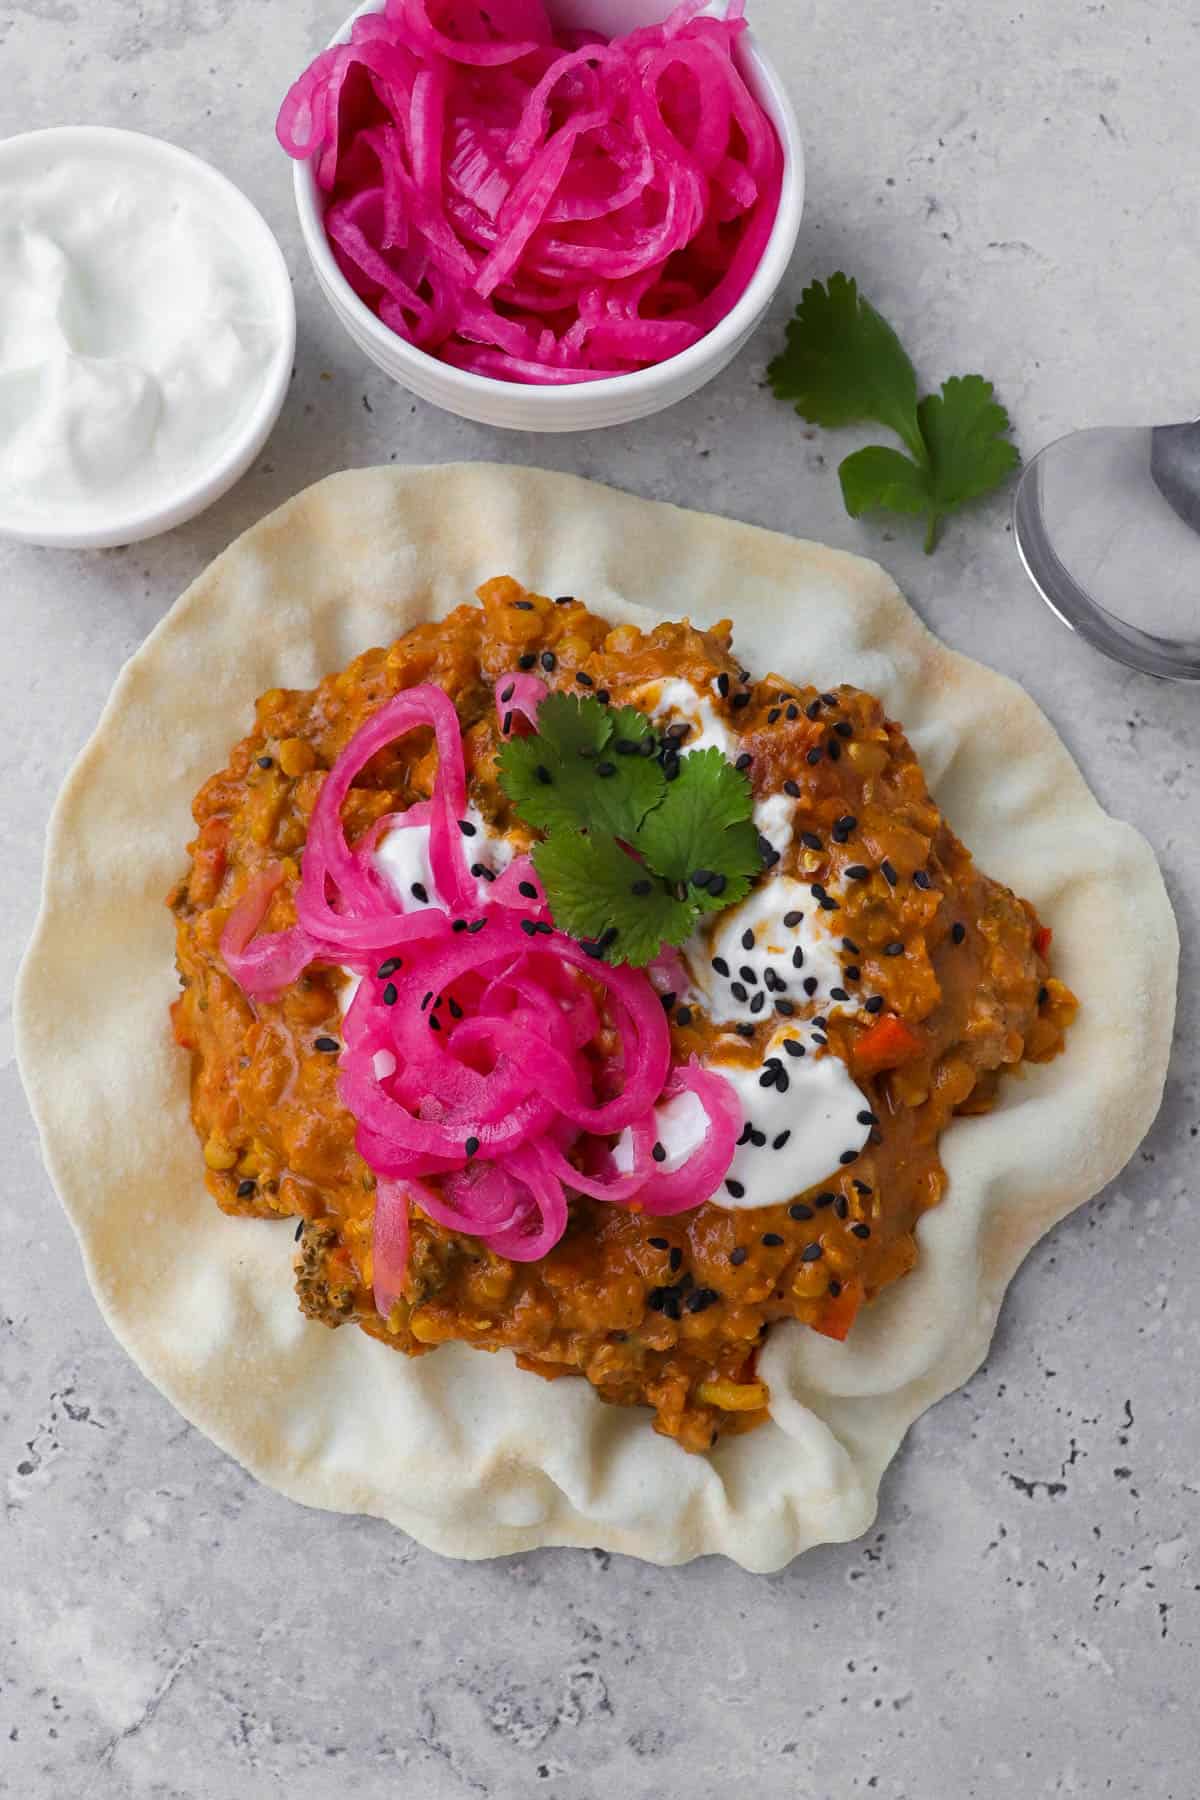 Dahl served in a papadum with pickled onions, yoghurt, coriander leaves and black sesame seeds for garnish.